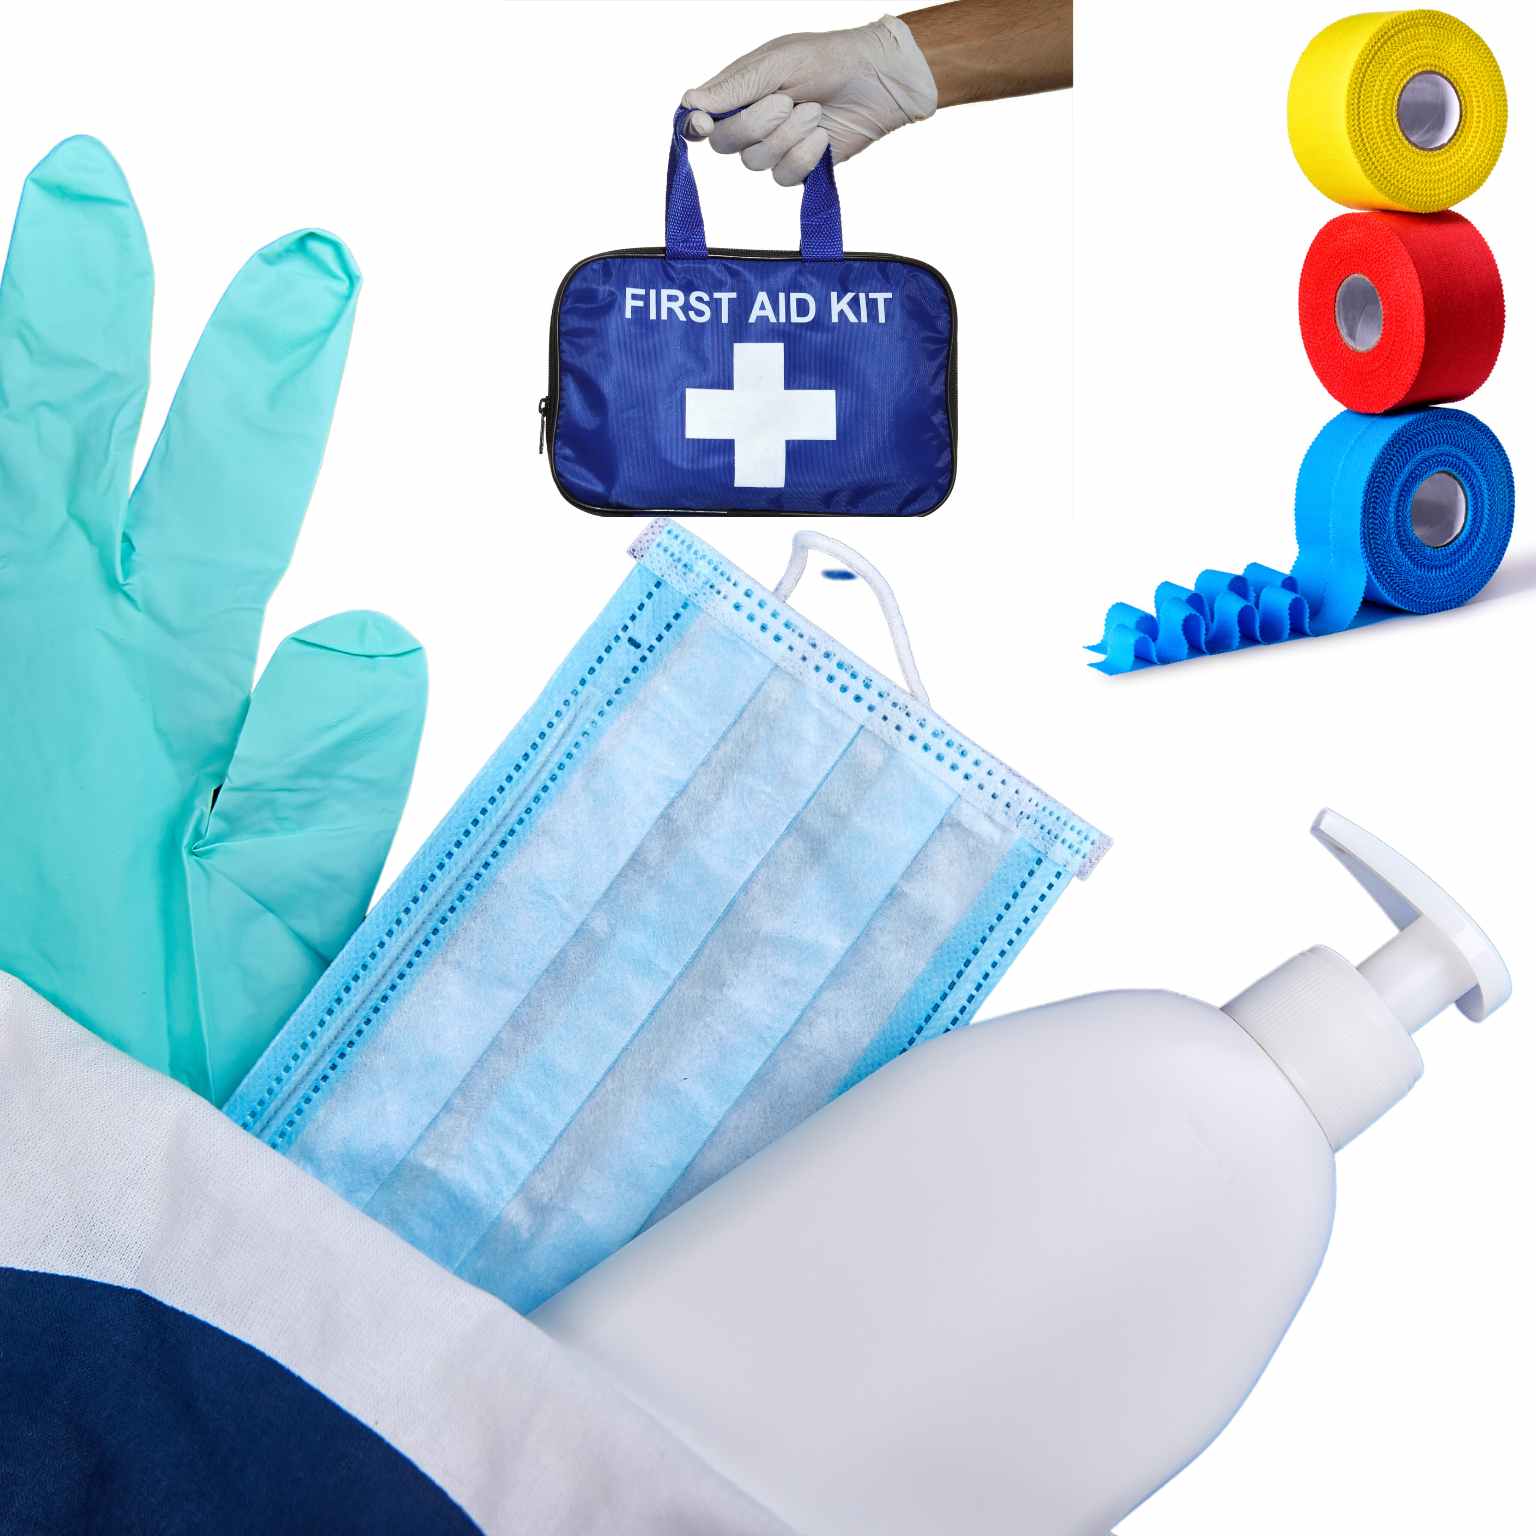 DealChanger's Medical Supplies Category: Disposeable Masks, Gloves, Hand Sanitizer, Kinesiology Tape, Athletic Tape, Self Stick Bandage